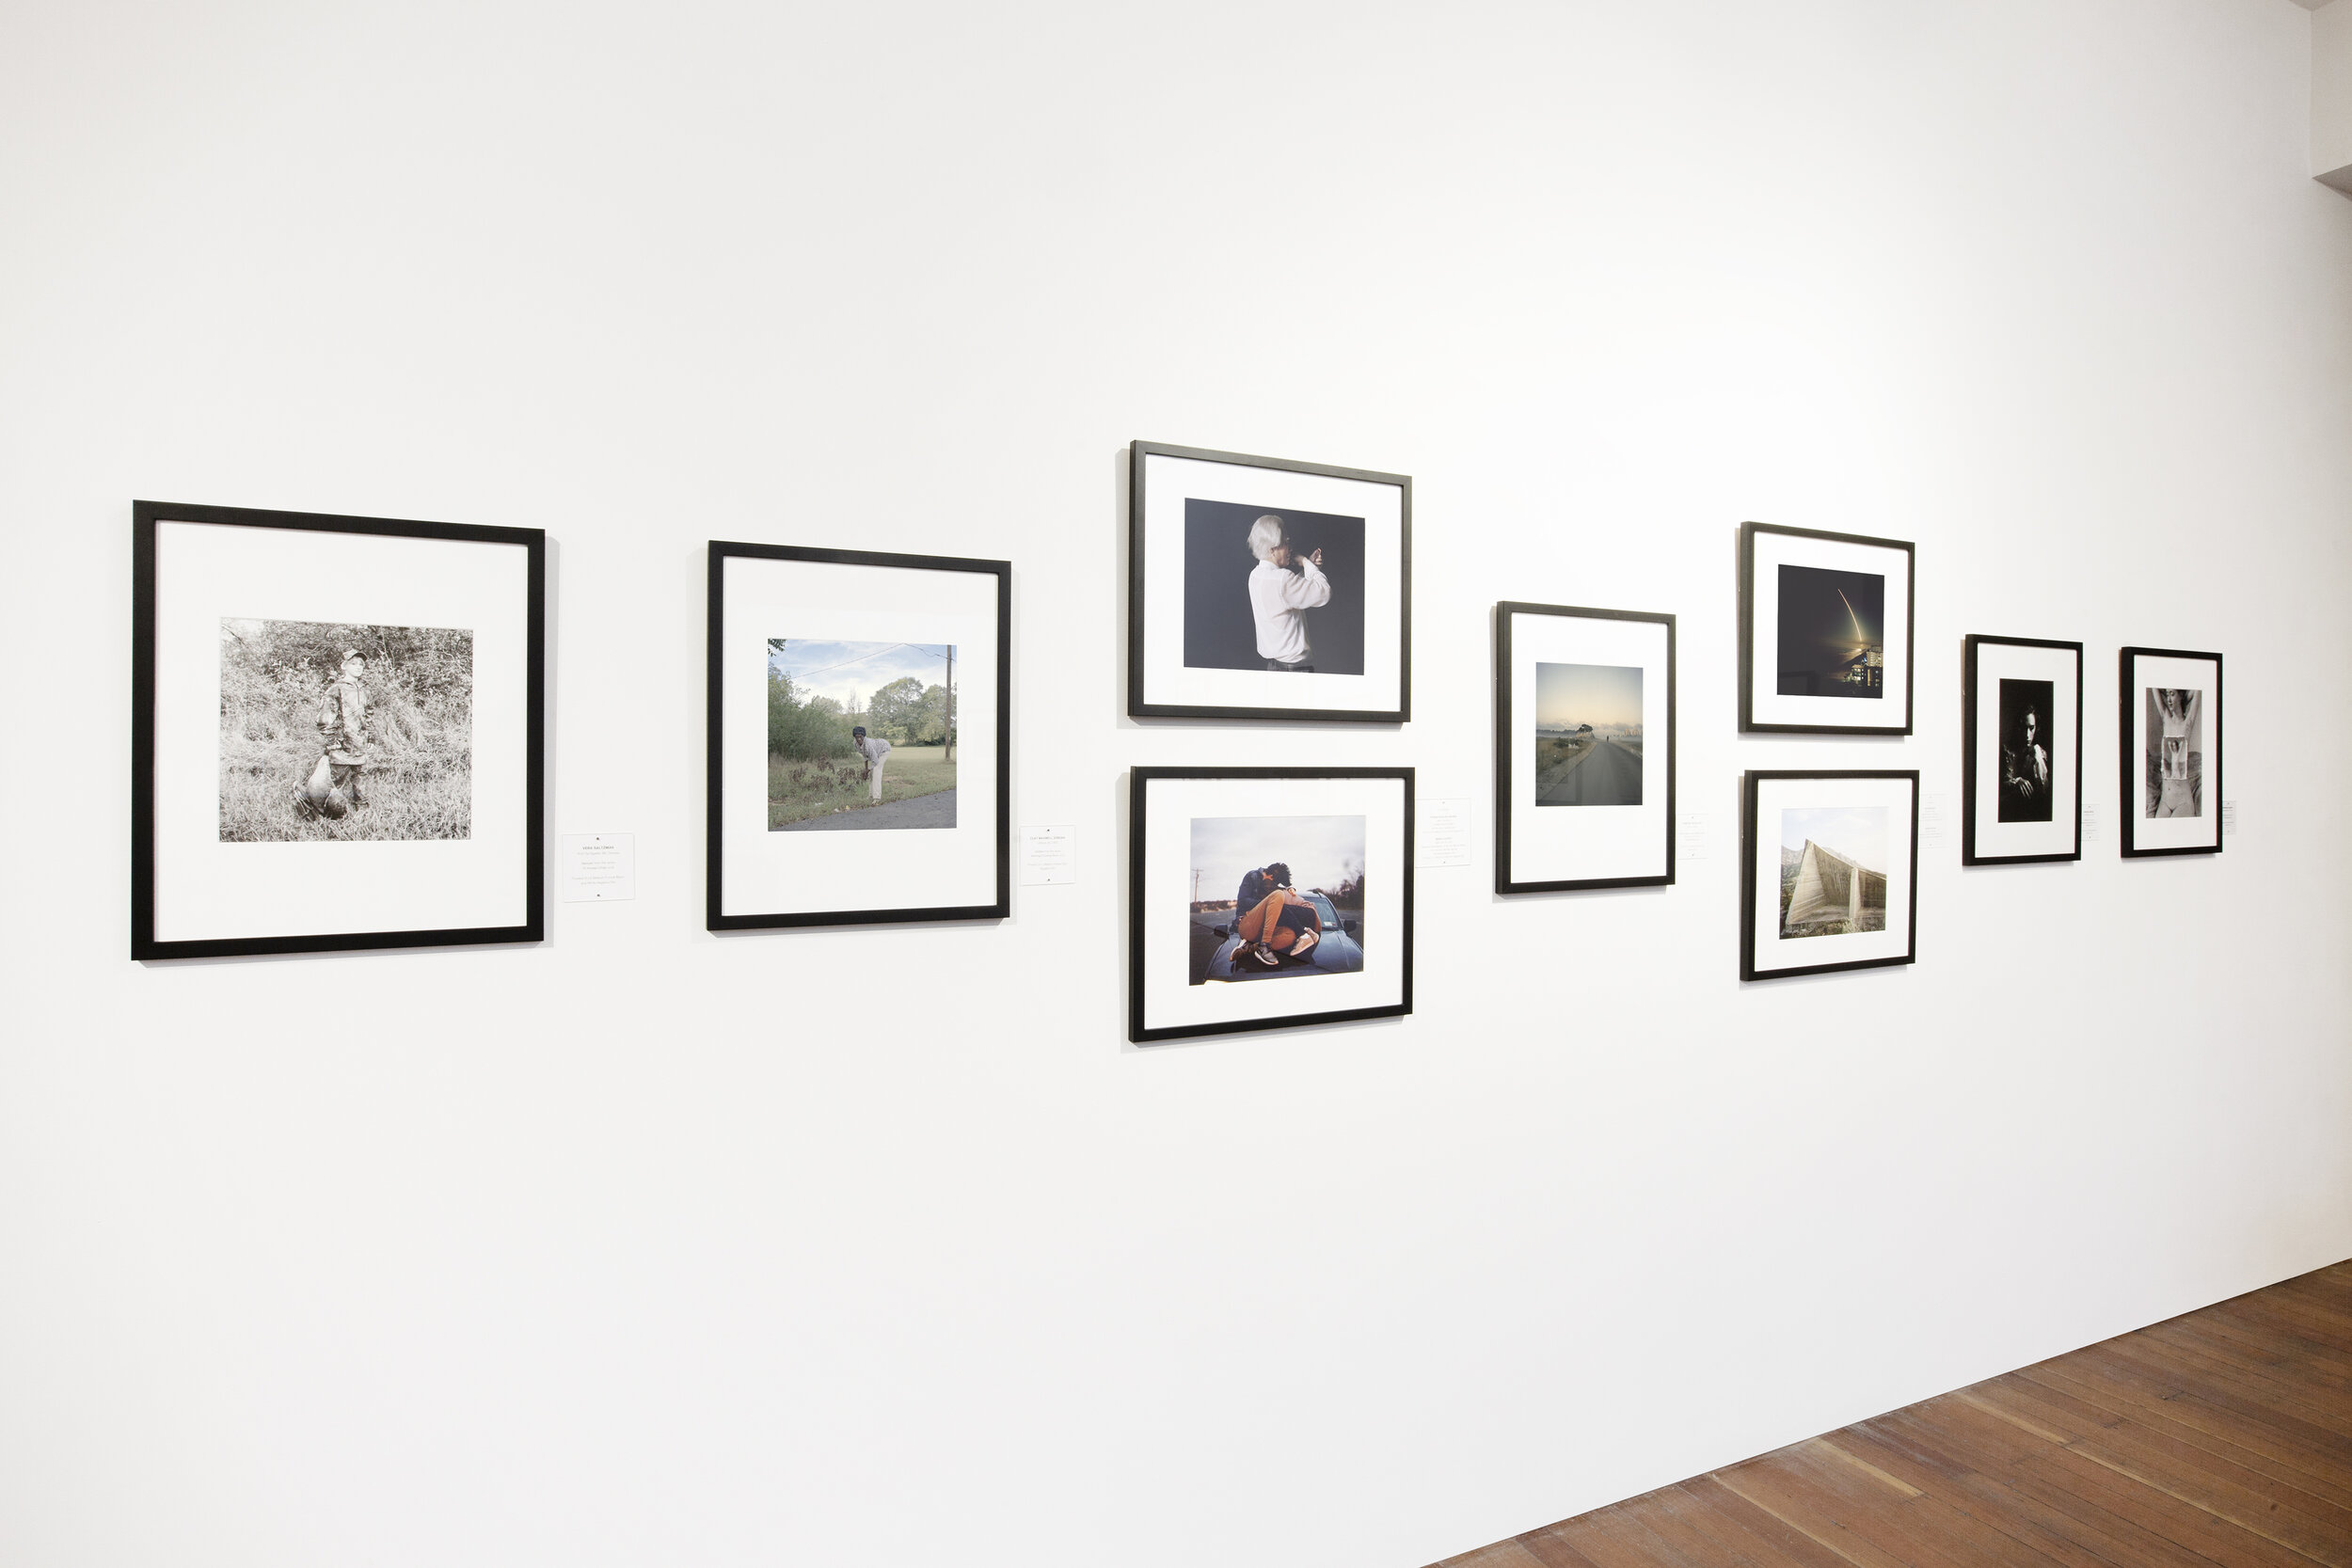   Installation view of Fotofilmic18  